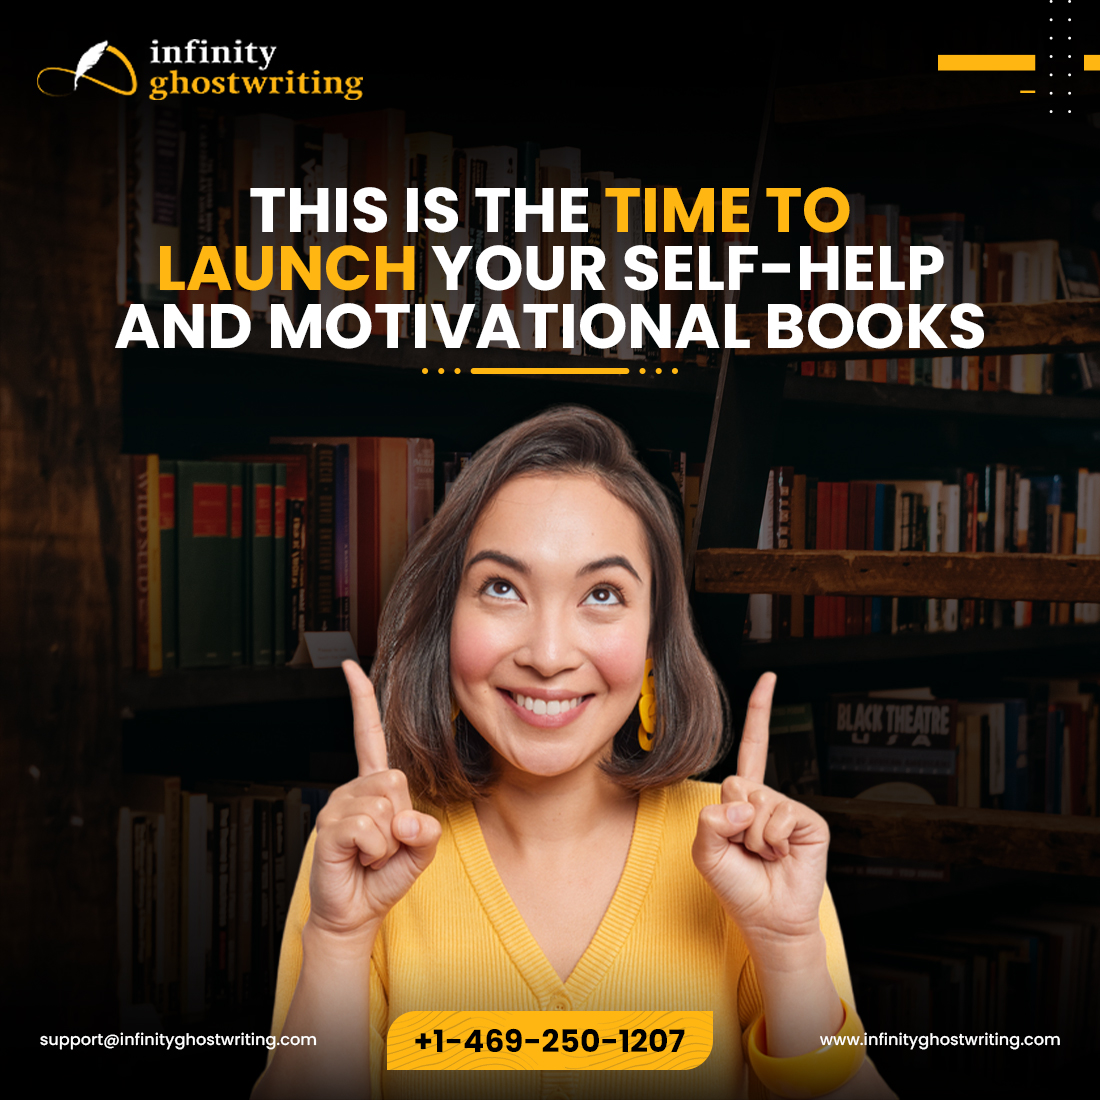 New is around the corner. Begin with your self-help and motivational books as that’s what people seek to read and thereby set their goals.

#infinityghostwriting #bookgenre #books #bookwriting #ghostwriting #selfhelpbooks